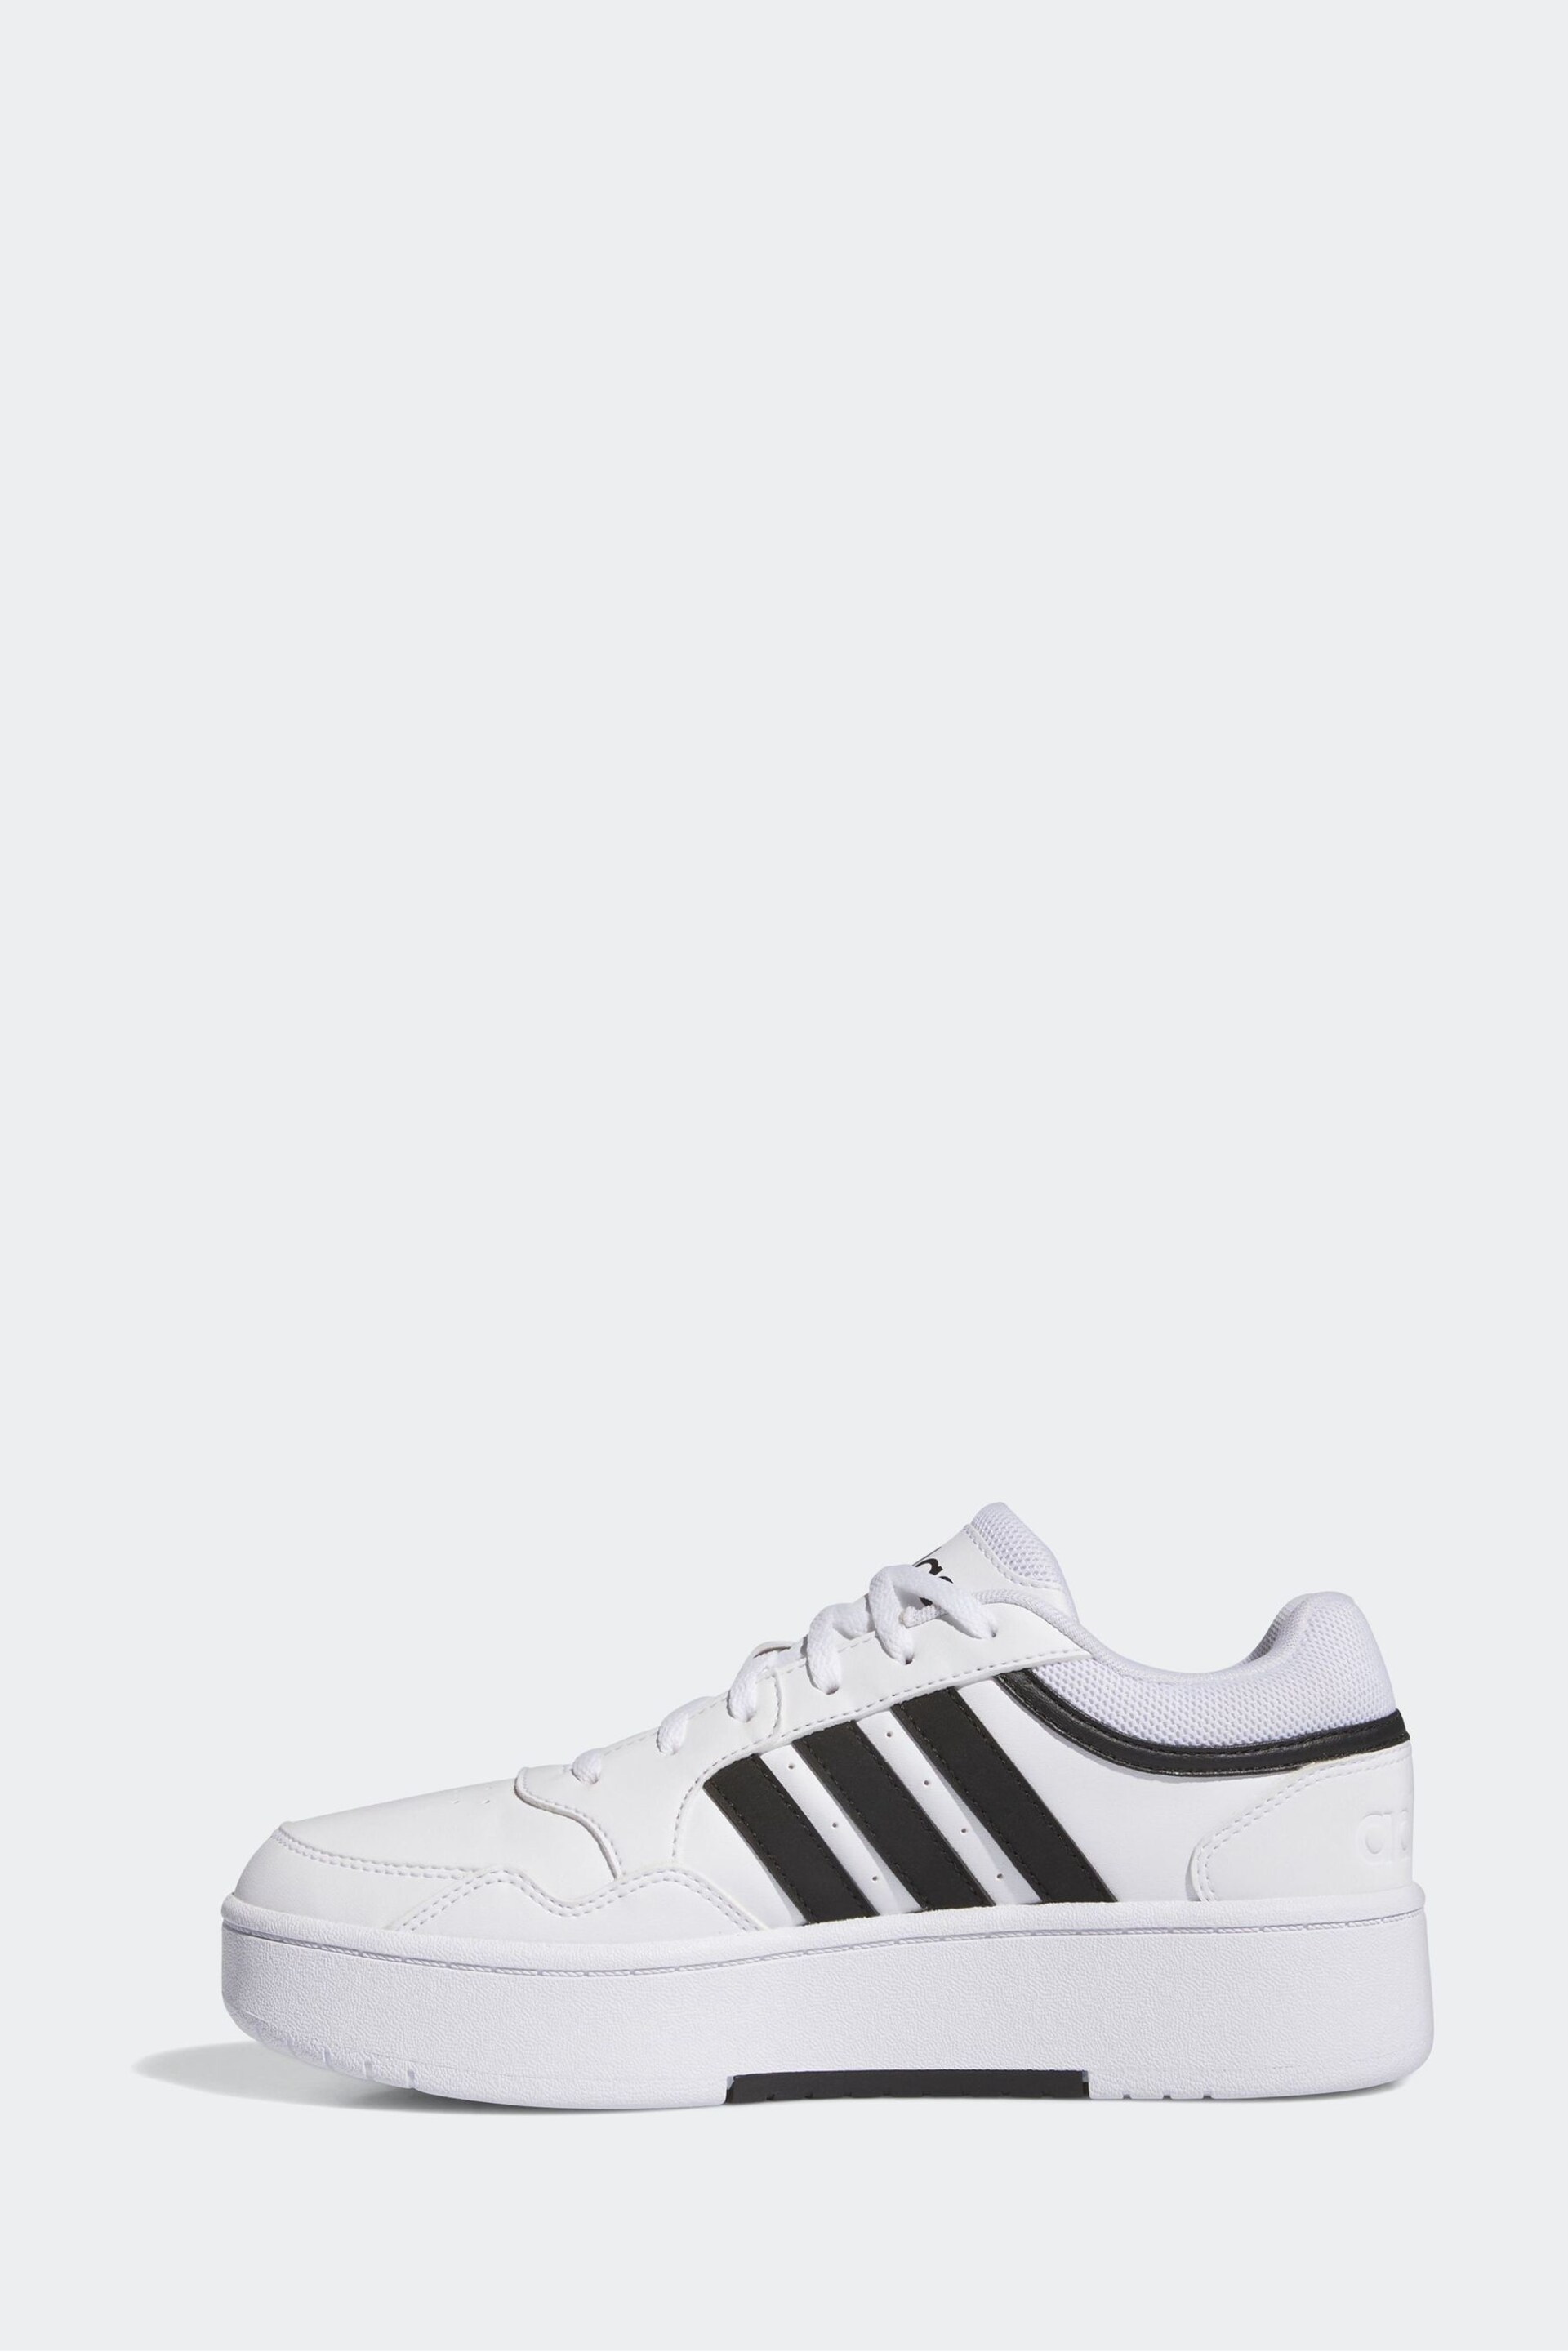 adidas Originals White/Black Hoops 3.0 Bold Trainers - Image 4 of 10